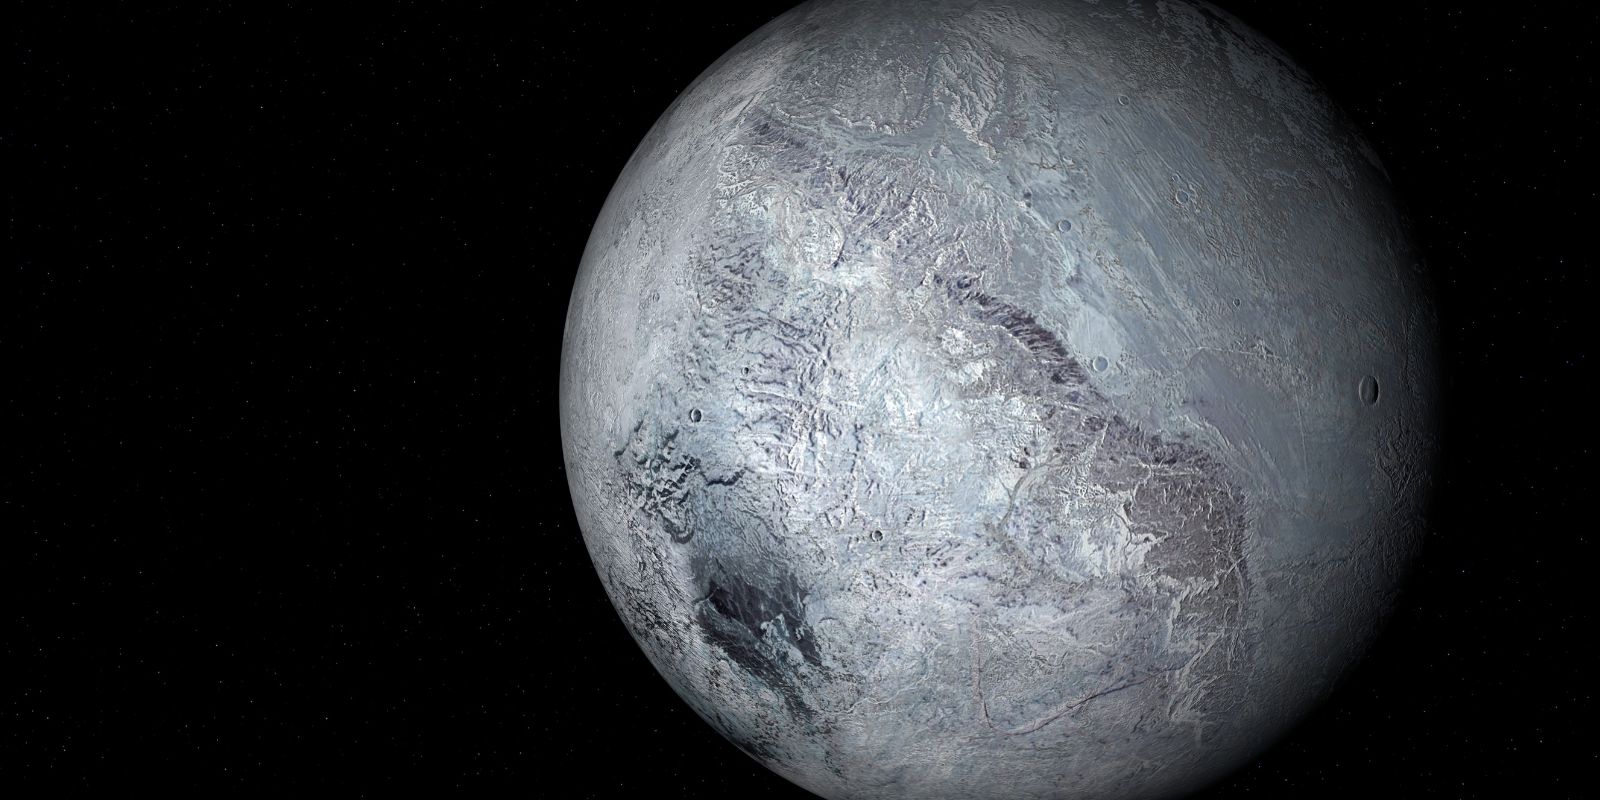 January 5th: Largest Known Dwarf Planet Discovered